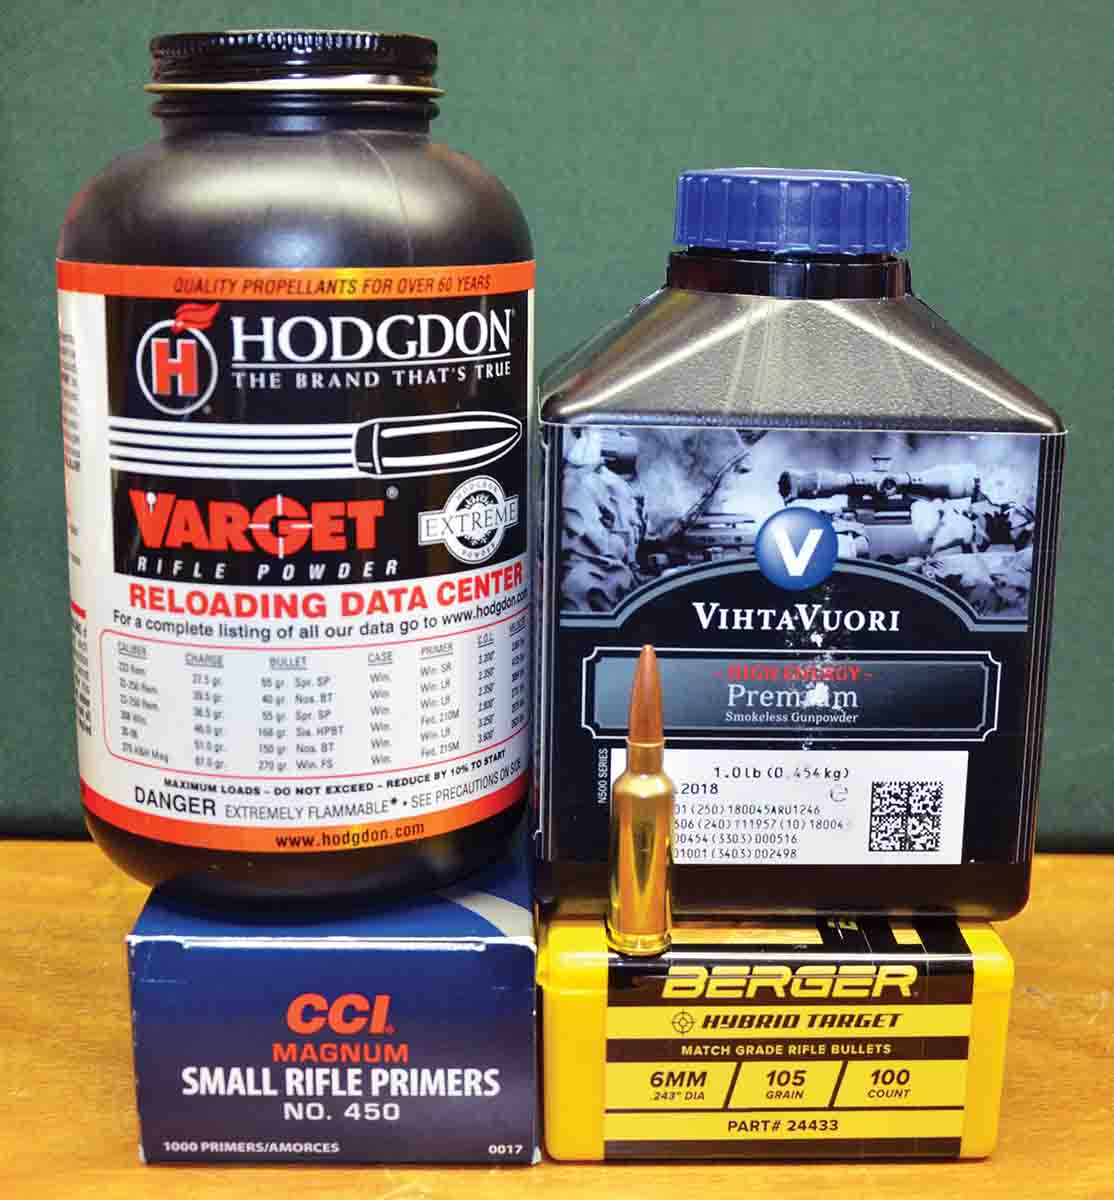 According to a Cal Zent – who surveyed around 75 world-class PRS and NRL competitors – the CCI 450 Magnum primer, Hodgdon Varget powder and the Berger 105-grain Hybrid Target are the most popular. Vihtavuori N-540 is also an excellent choice.